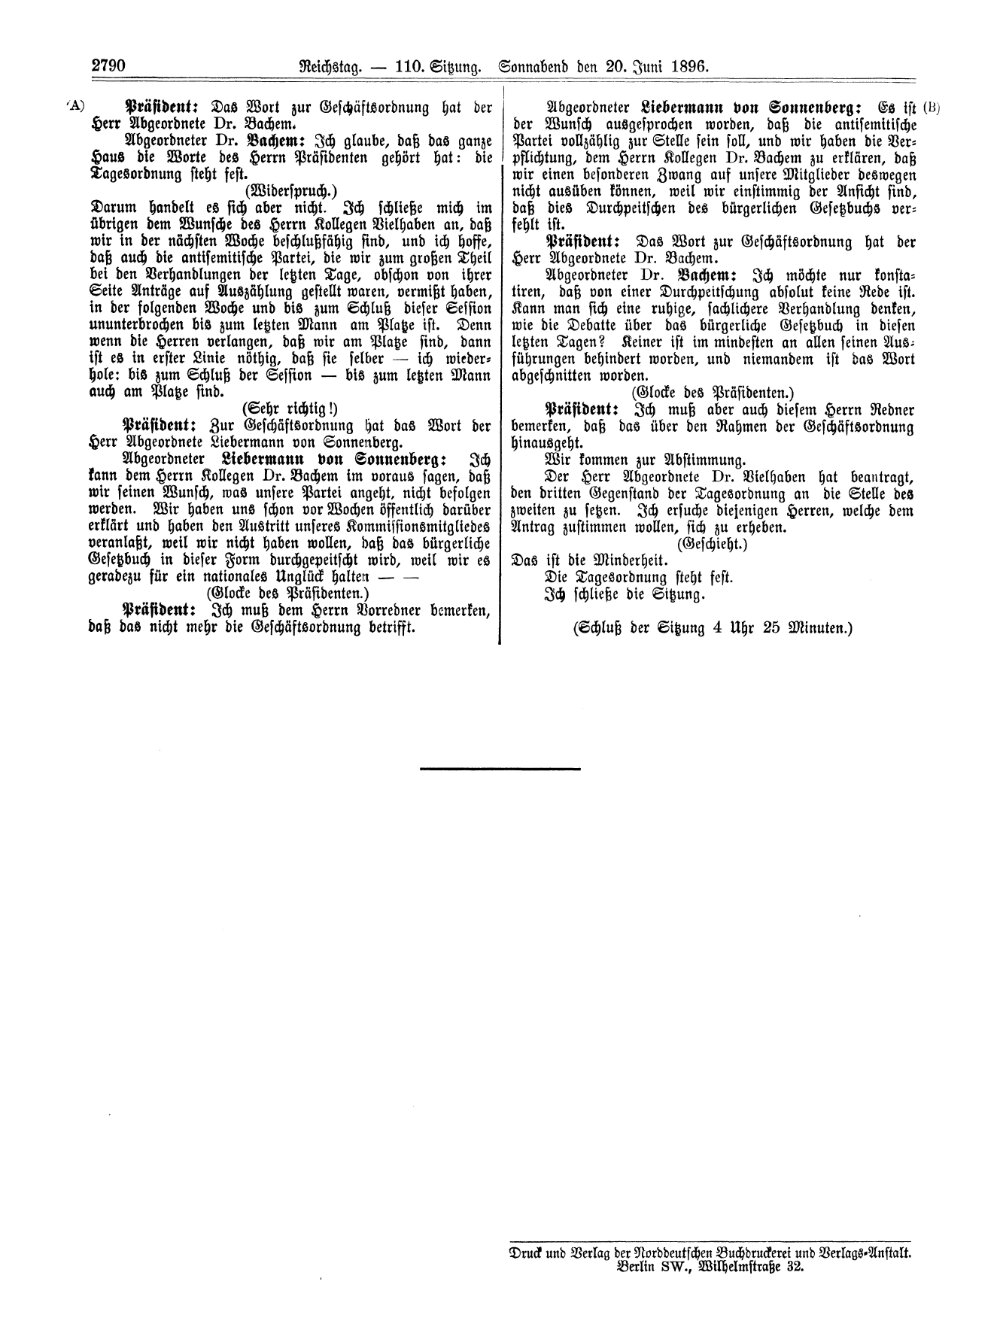 Scan of page 2790